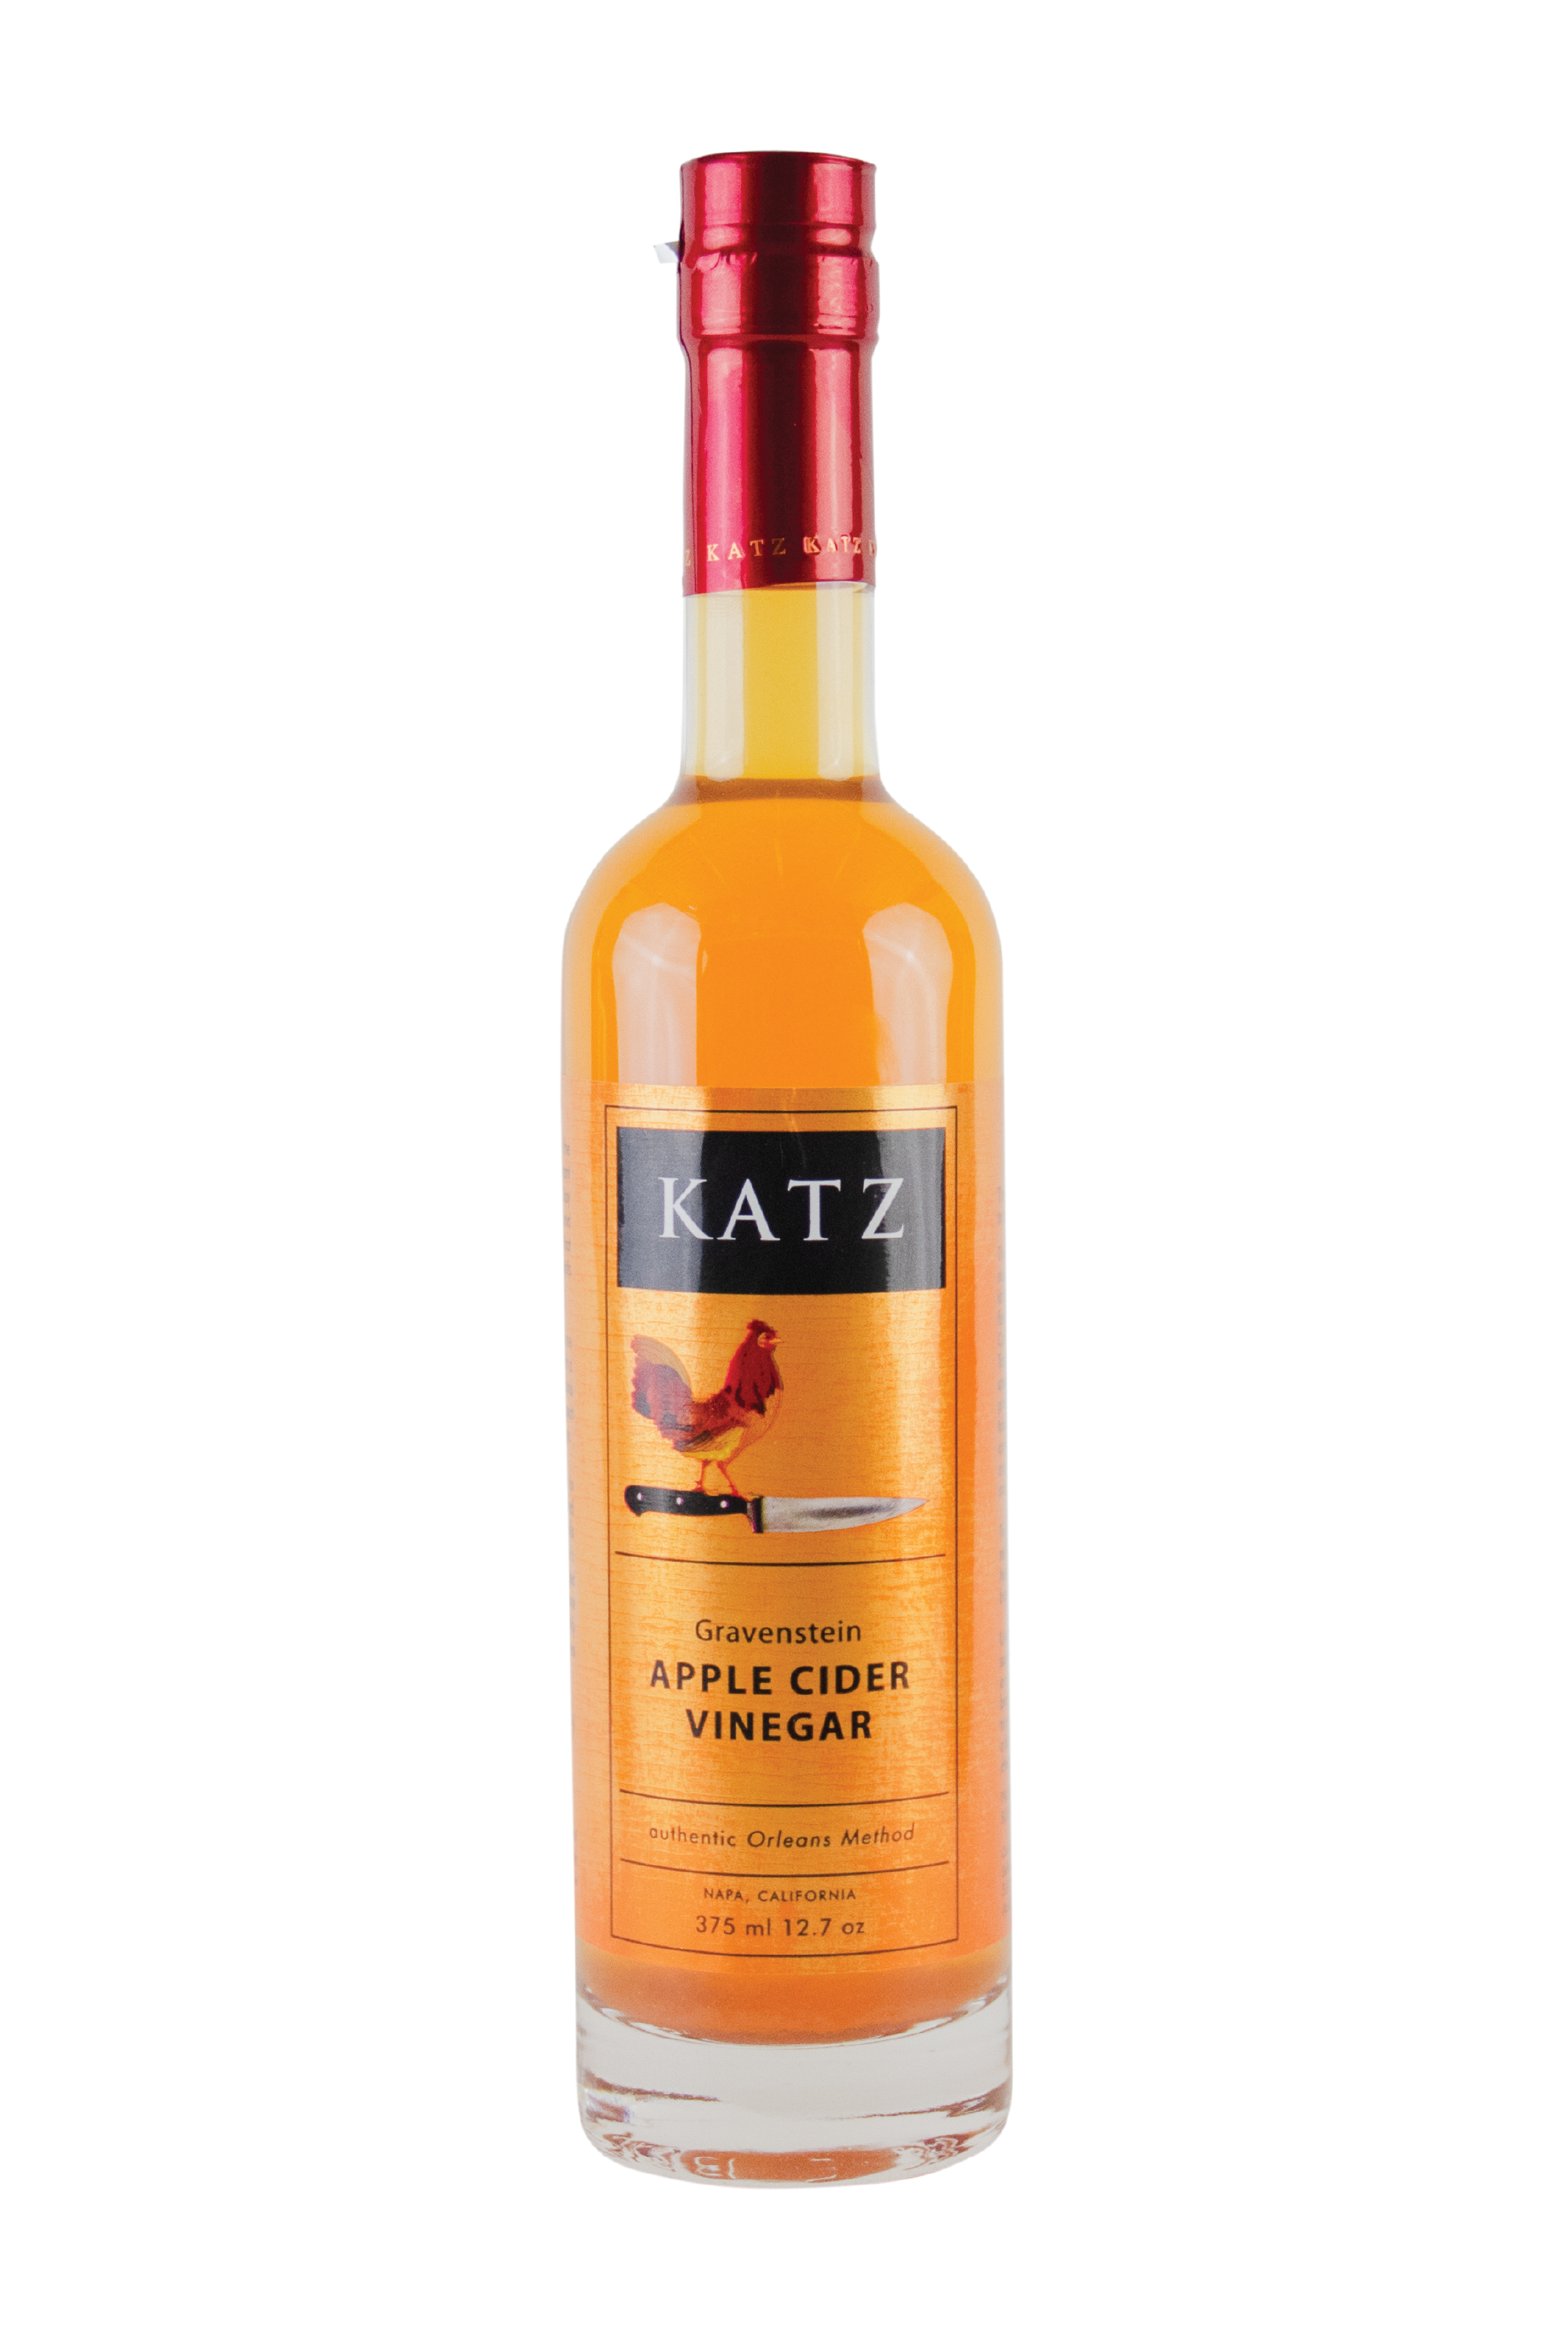 A 375 ml/12.7 oz glass bottle of Katz Gravenstein Apple Cider Vinegar on a white background. Label is dark gold and black with the image of a rooster standing on the hilt of a chef's knife and the words, "Authentic Orleans Method" and "Napa, California" on the bottle. Vinegar is a bright marigold orange, visible through the clear glass bottle with red foil shrink wrap on the top with the word "Katz" printed around the circumference.